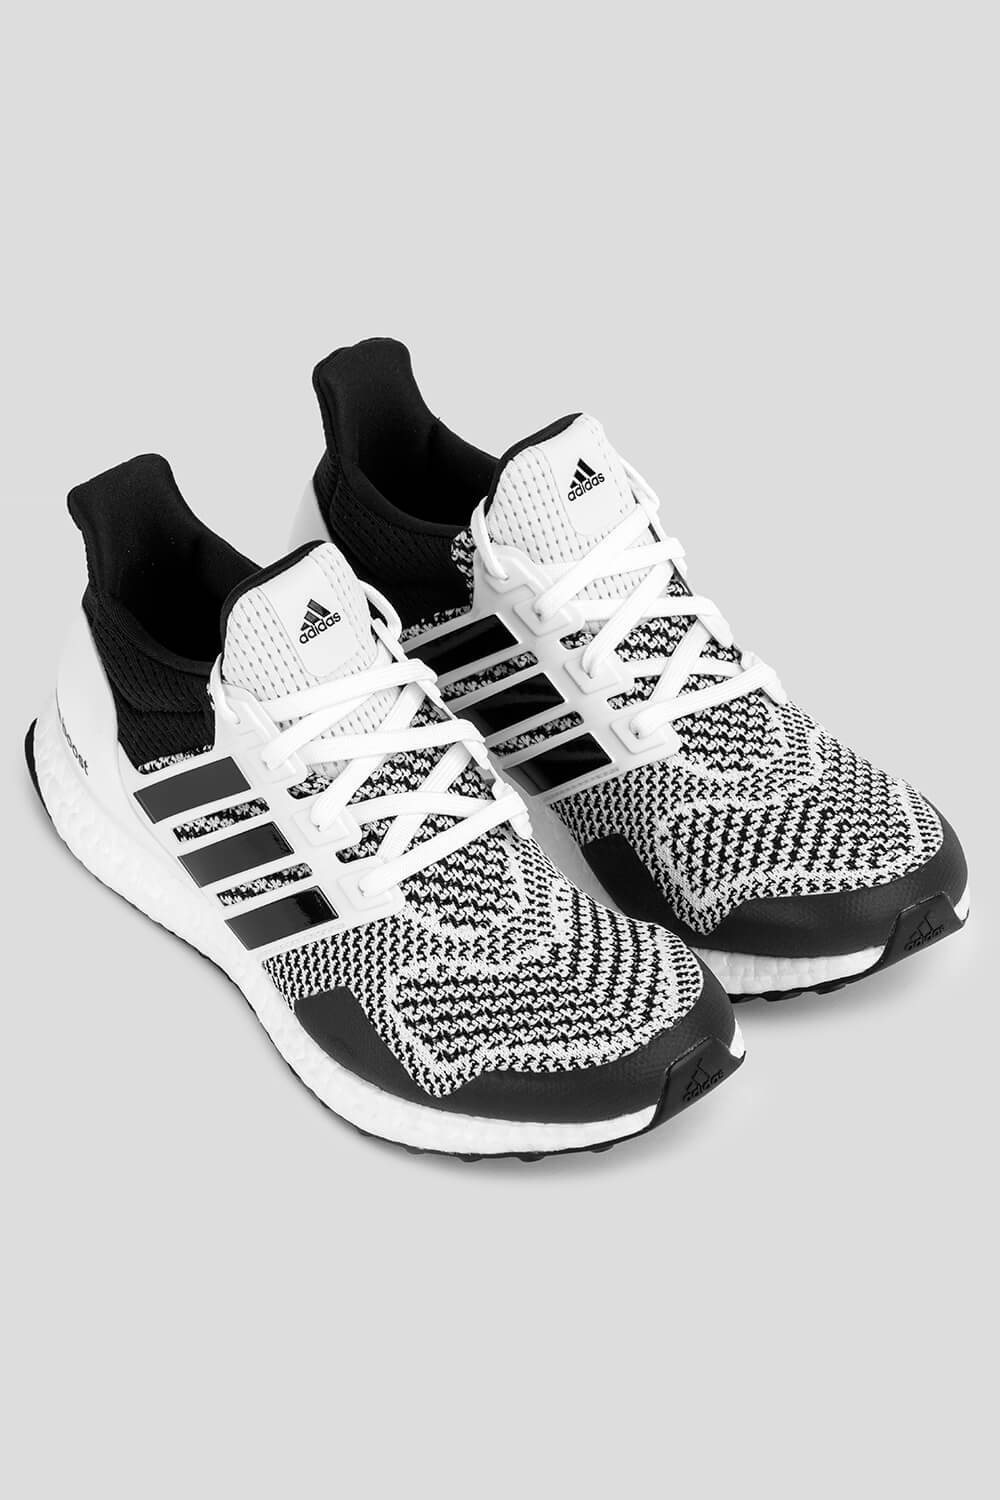 Ultraboost Dna Cookies And Creamlimited Special Sales And Special Offers Women S Men S Sneakers Sports Shoes Shop Athletic Shoes Online Off 74 Free Shipping Fast Shippment